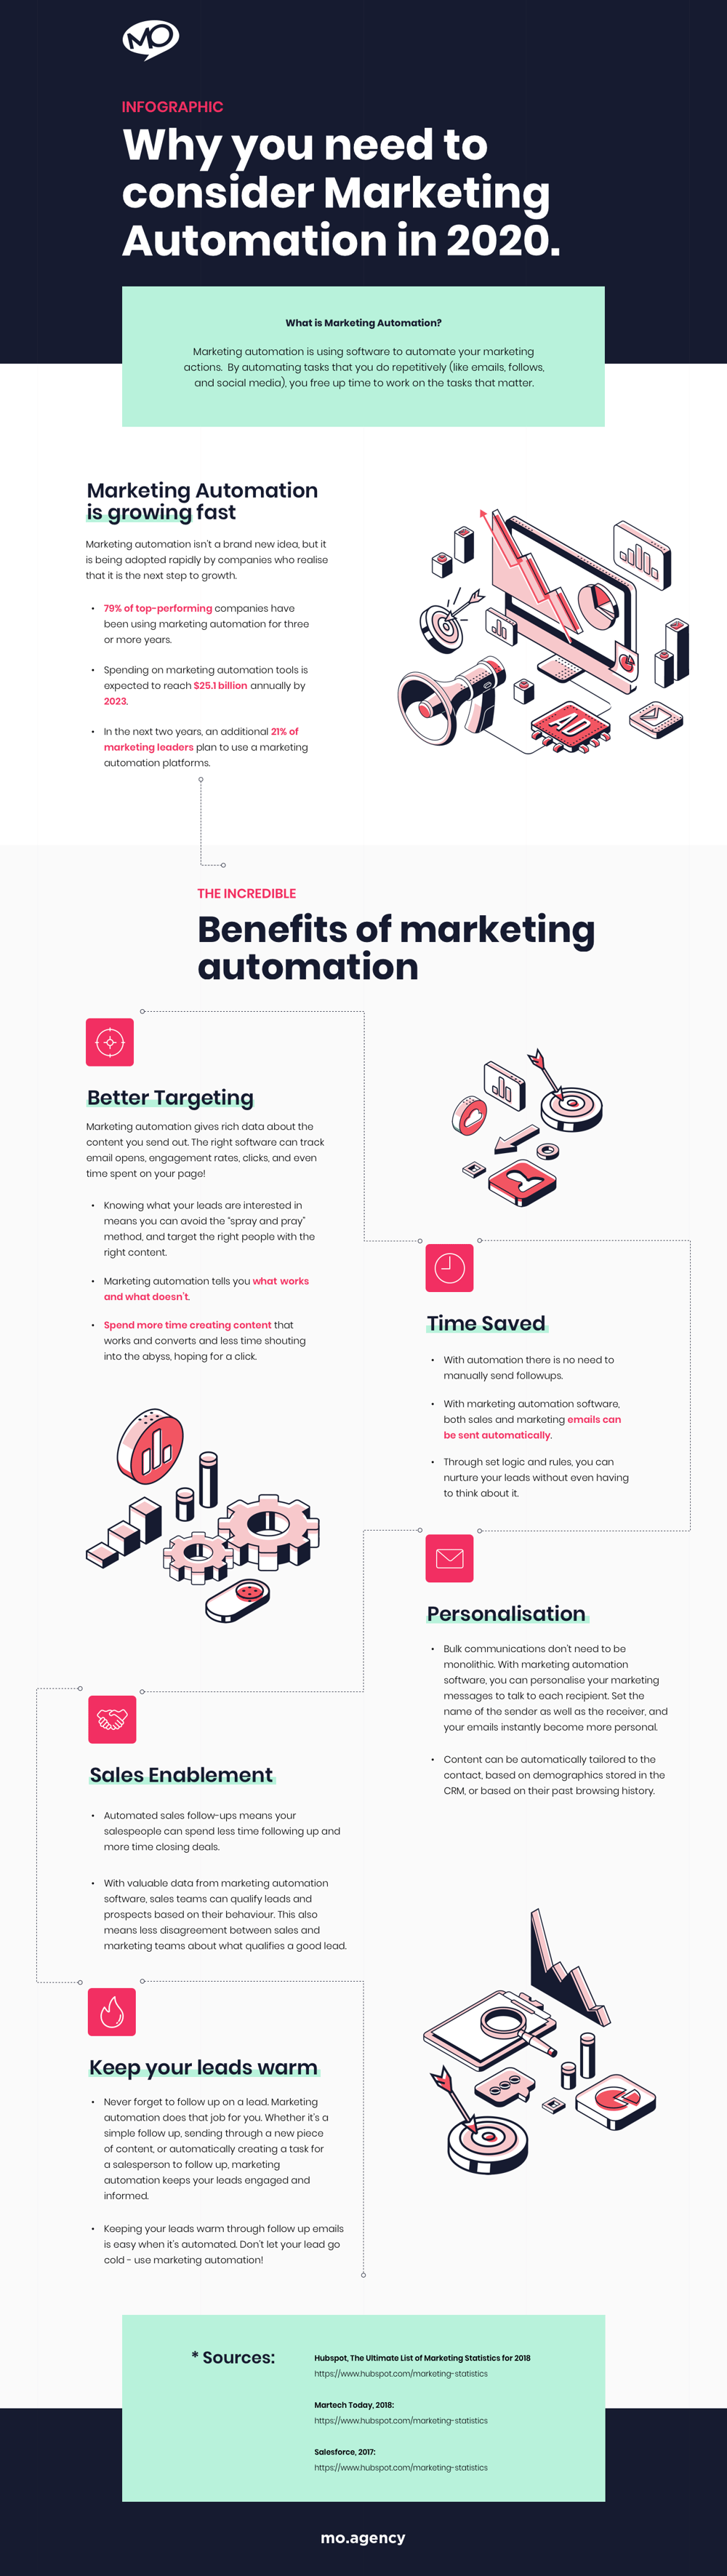 MO - Marketing Automation - Infographic - No Link - 20200306